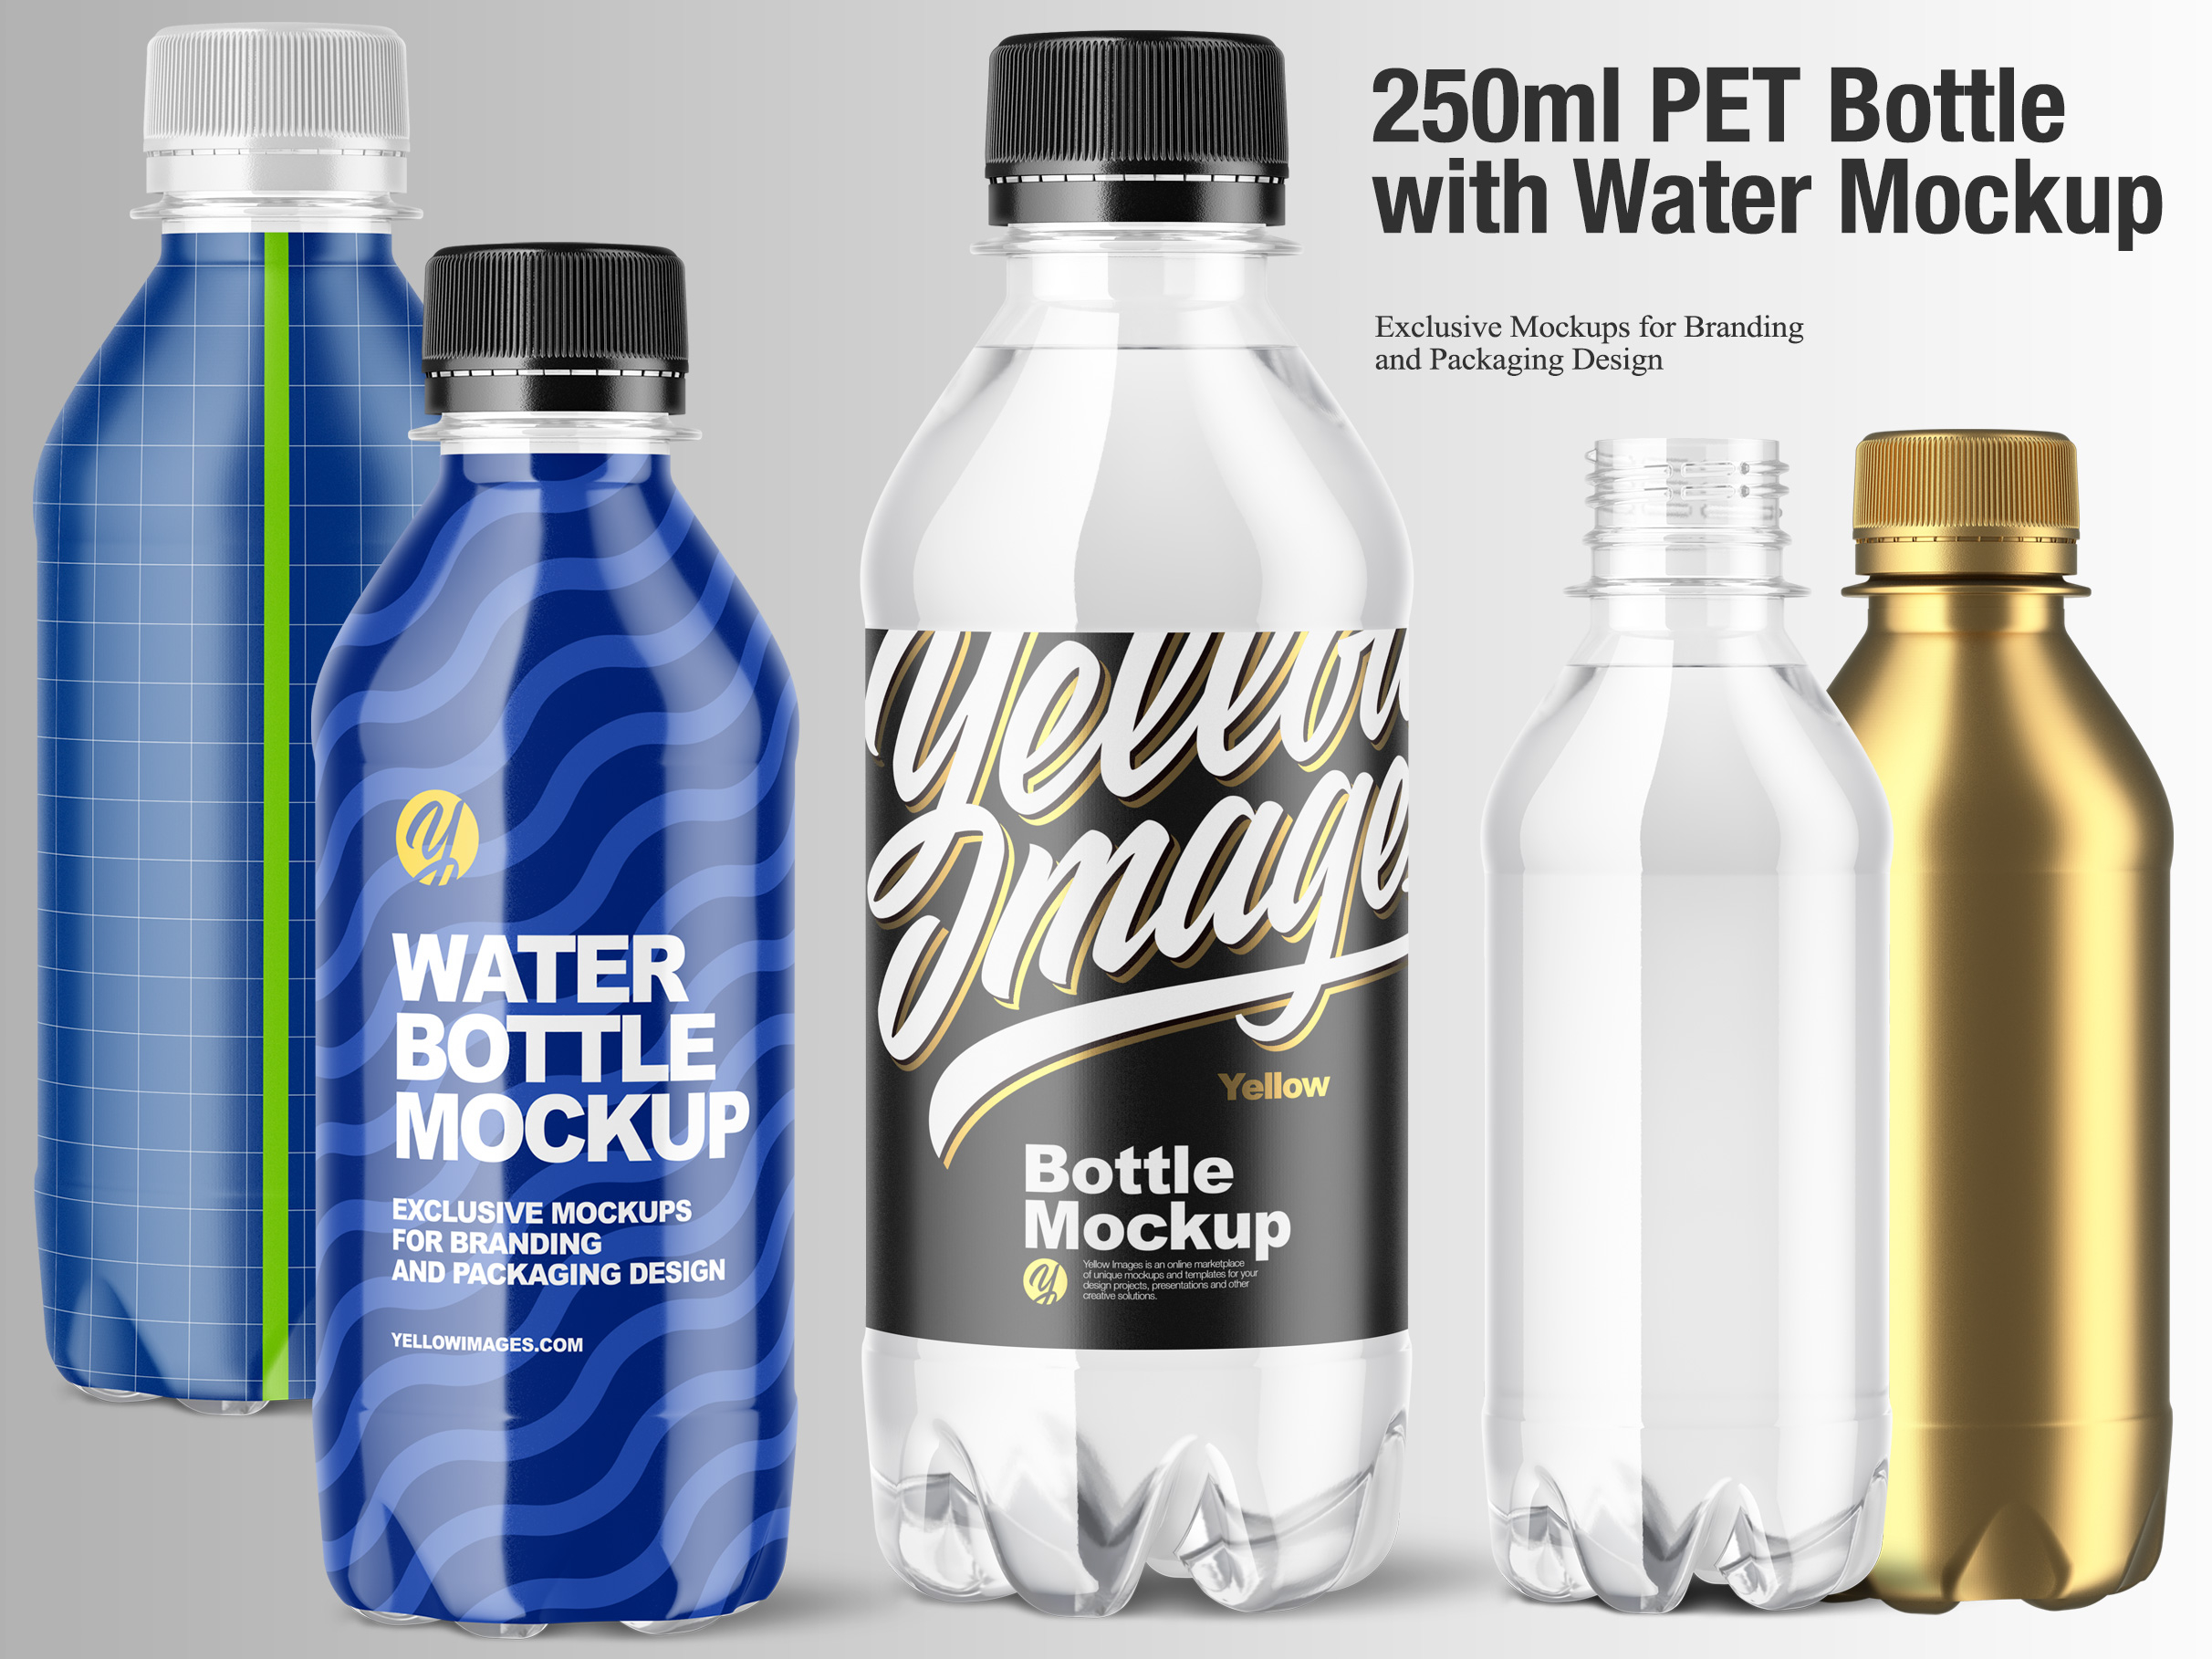 Download 250ml Pet Bottle With Water Mockup By Oleksandr Hlubokyi On Dribbble Yellowimages Mockups